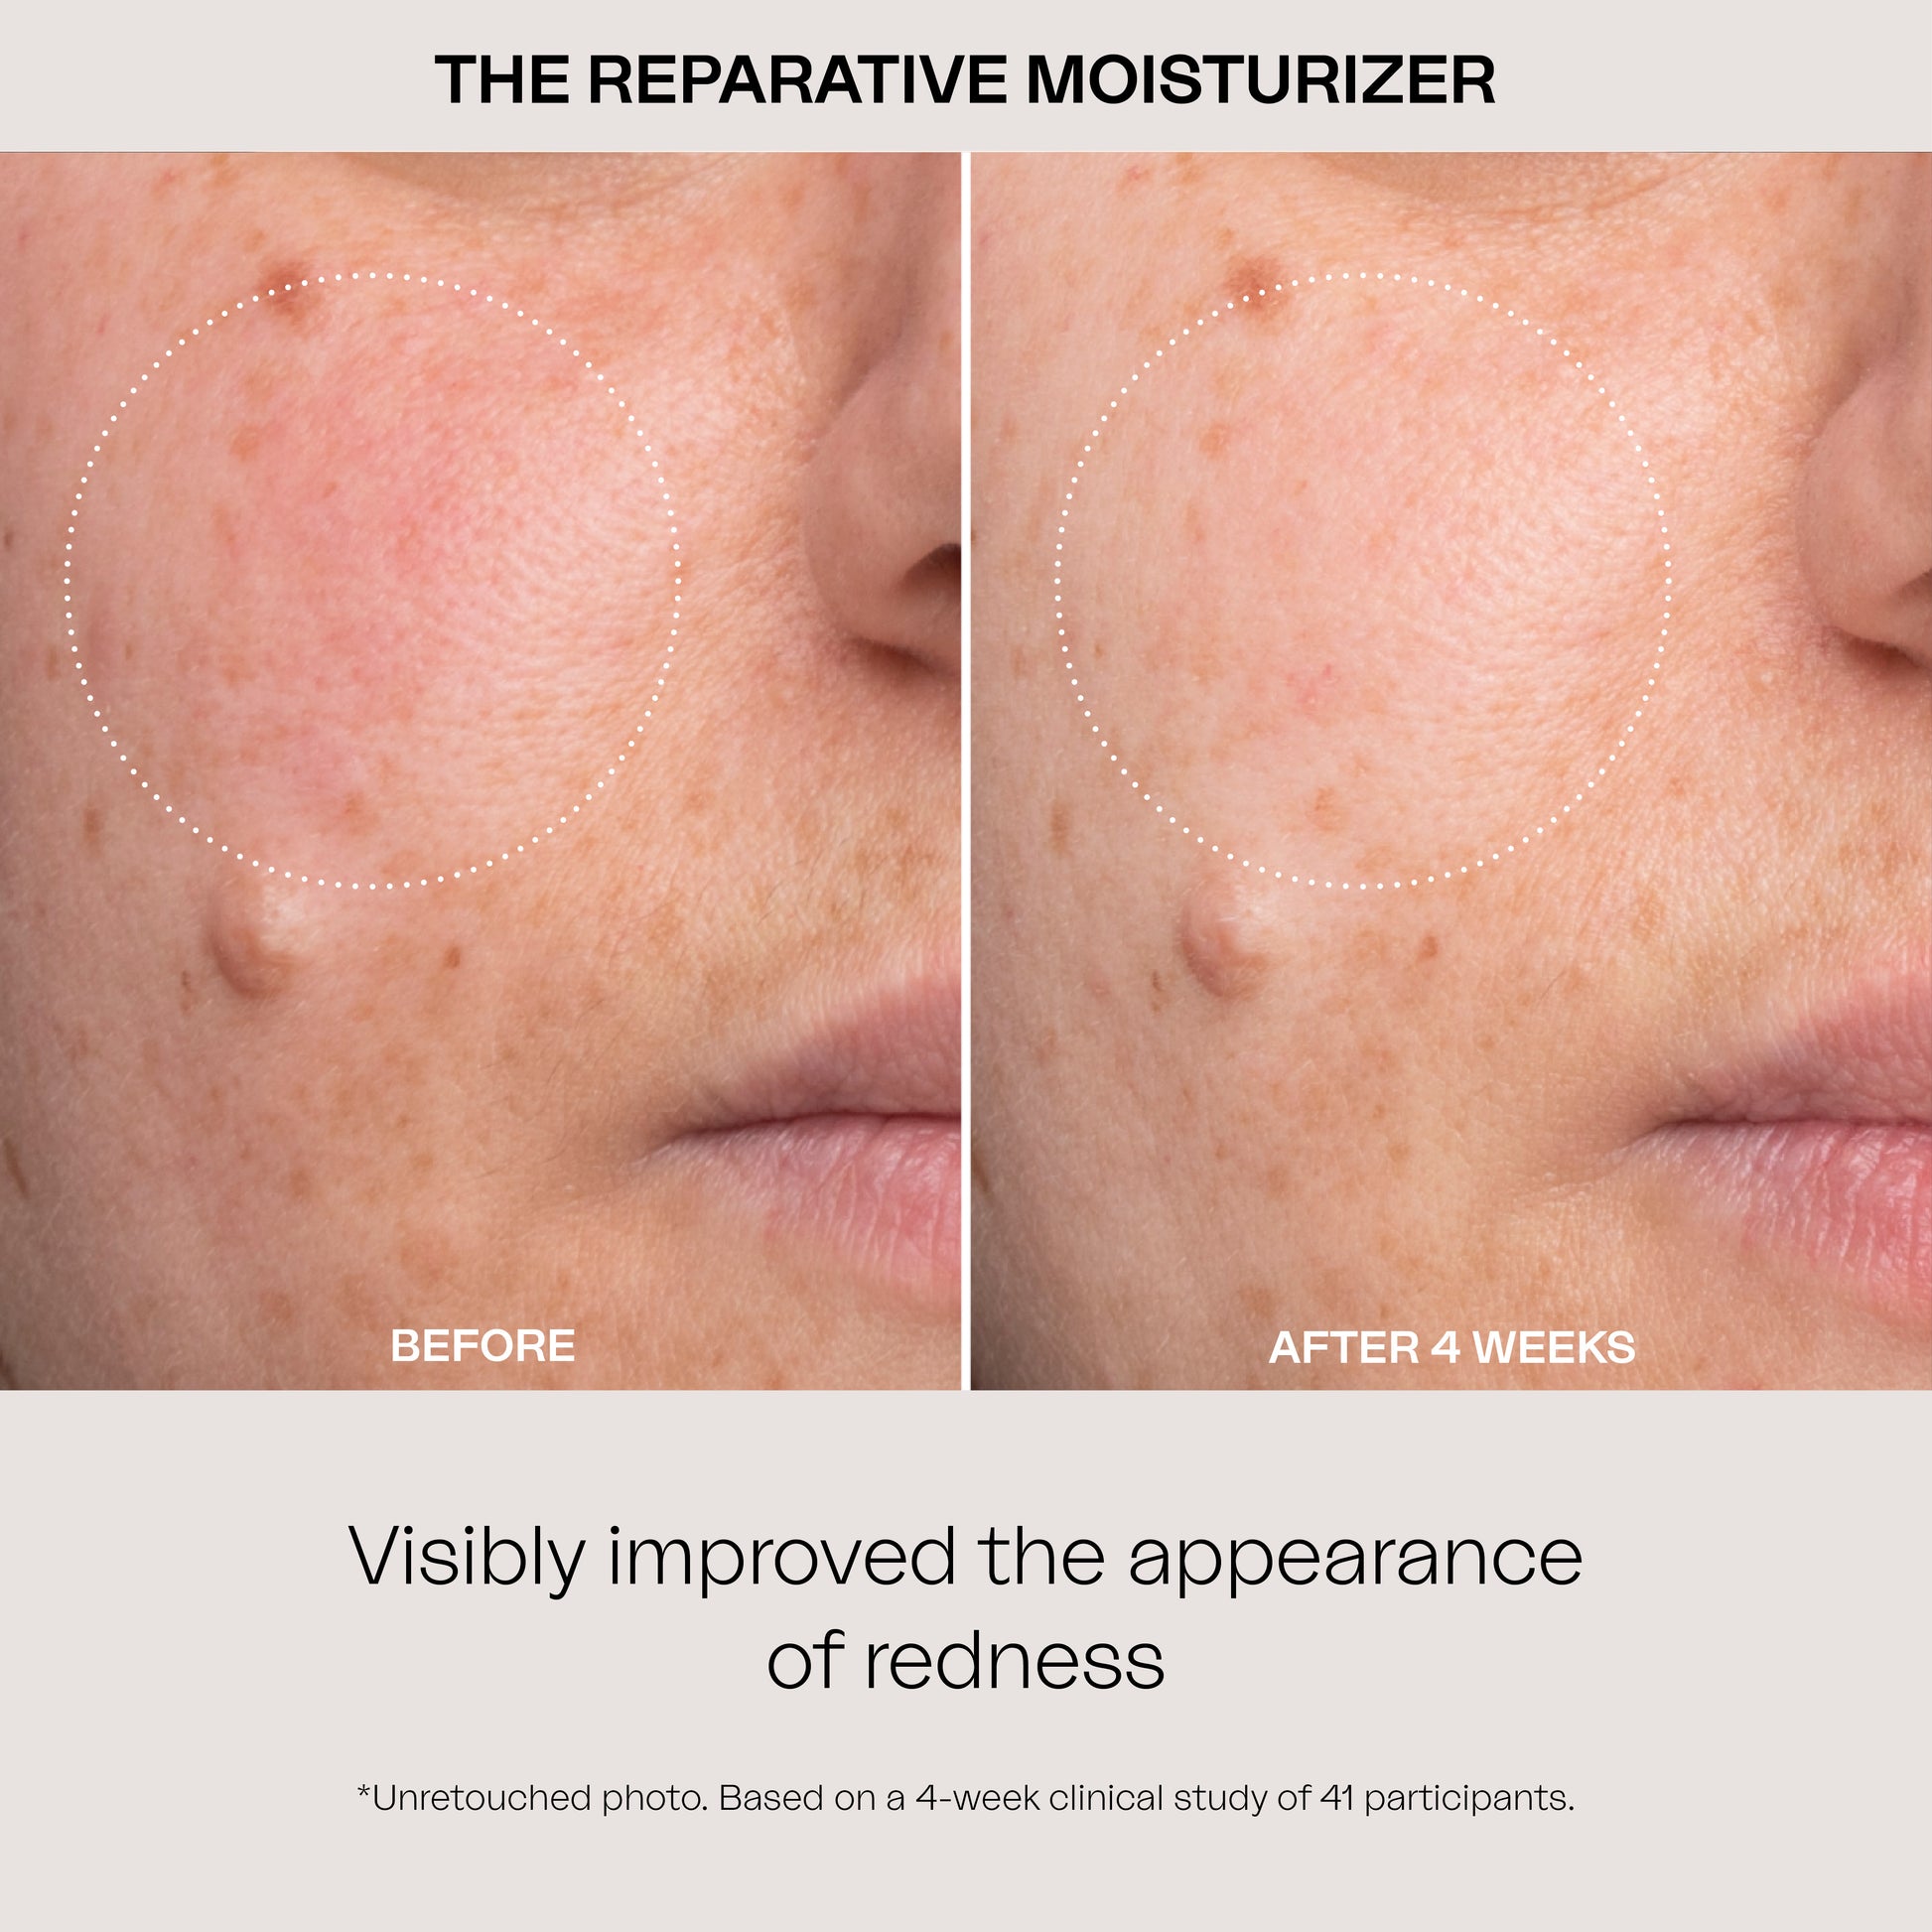 The Reparative Moisturizer visibly improved the appearance of redness. Based on a 4-week clinical study of 41 participants.